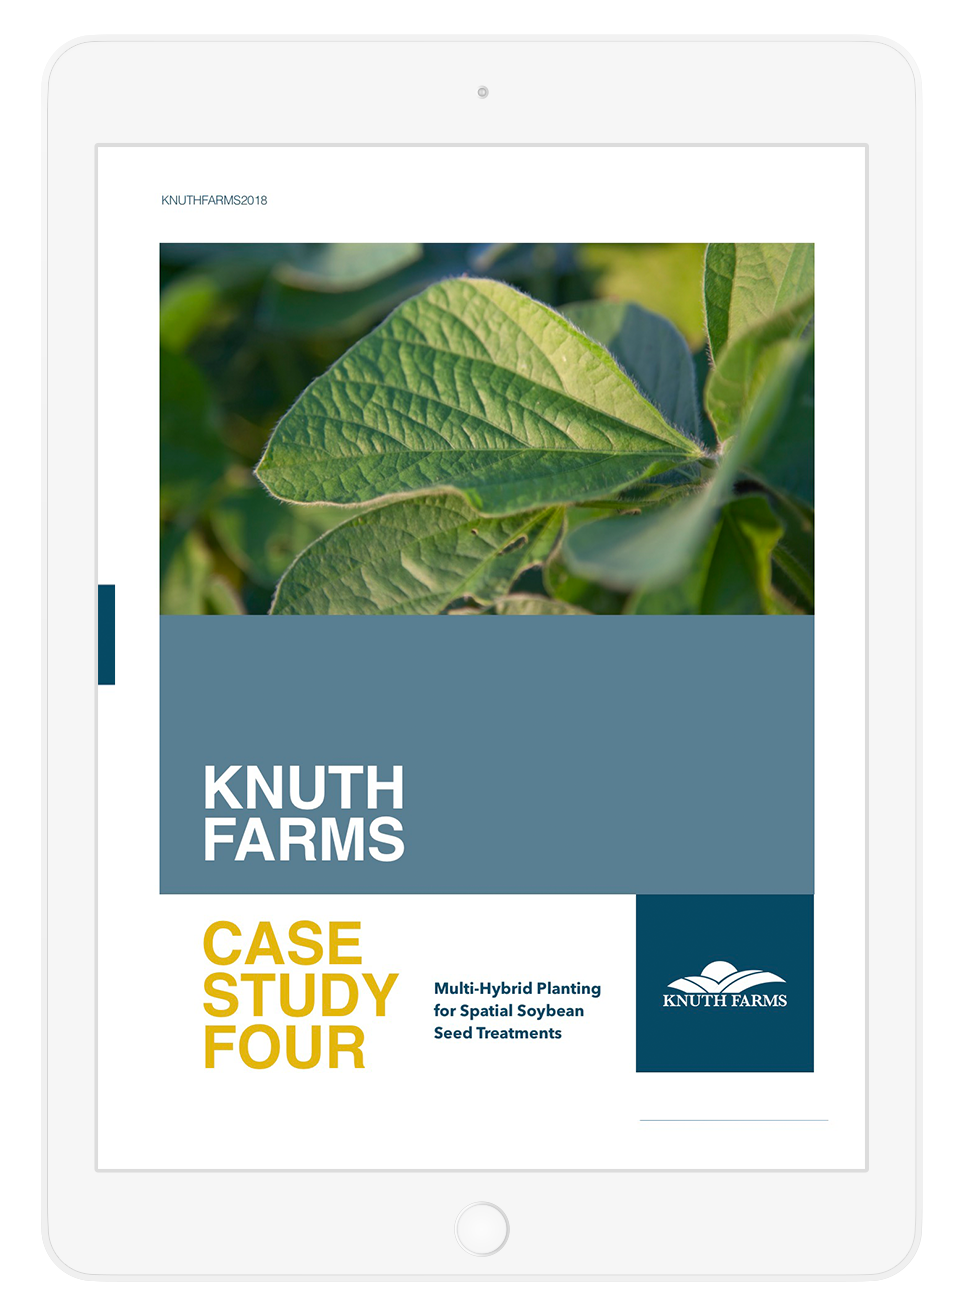 Knuth Farms ebook for Multi-Hybrid Planting for spatial soybean seed treatments